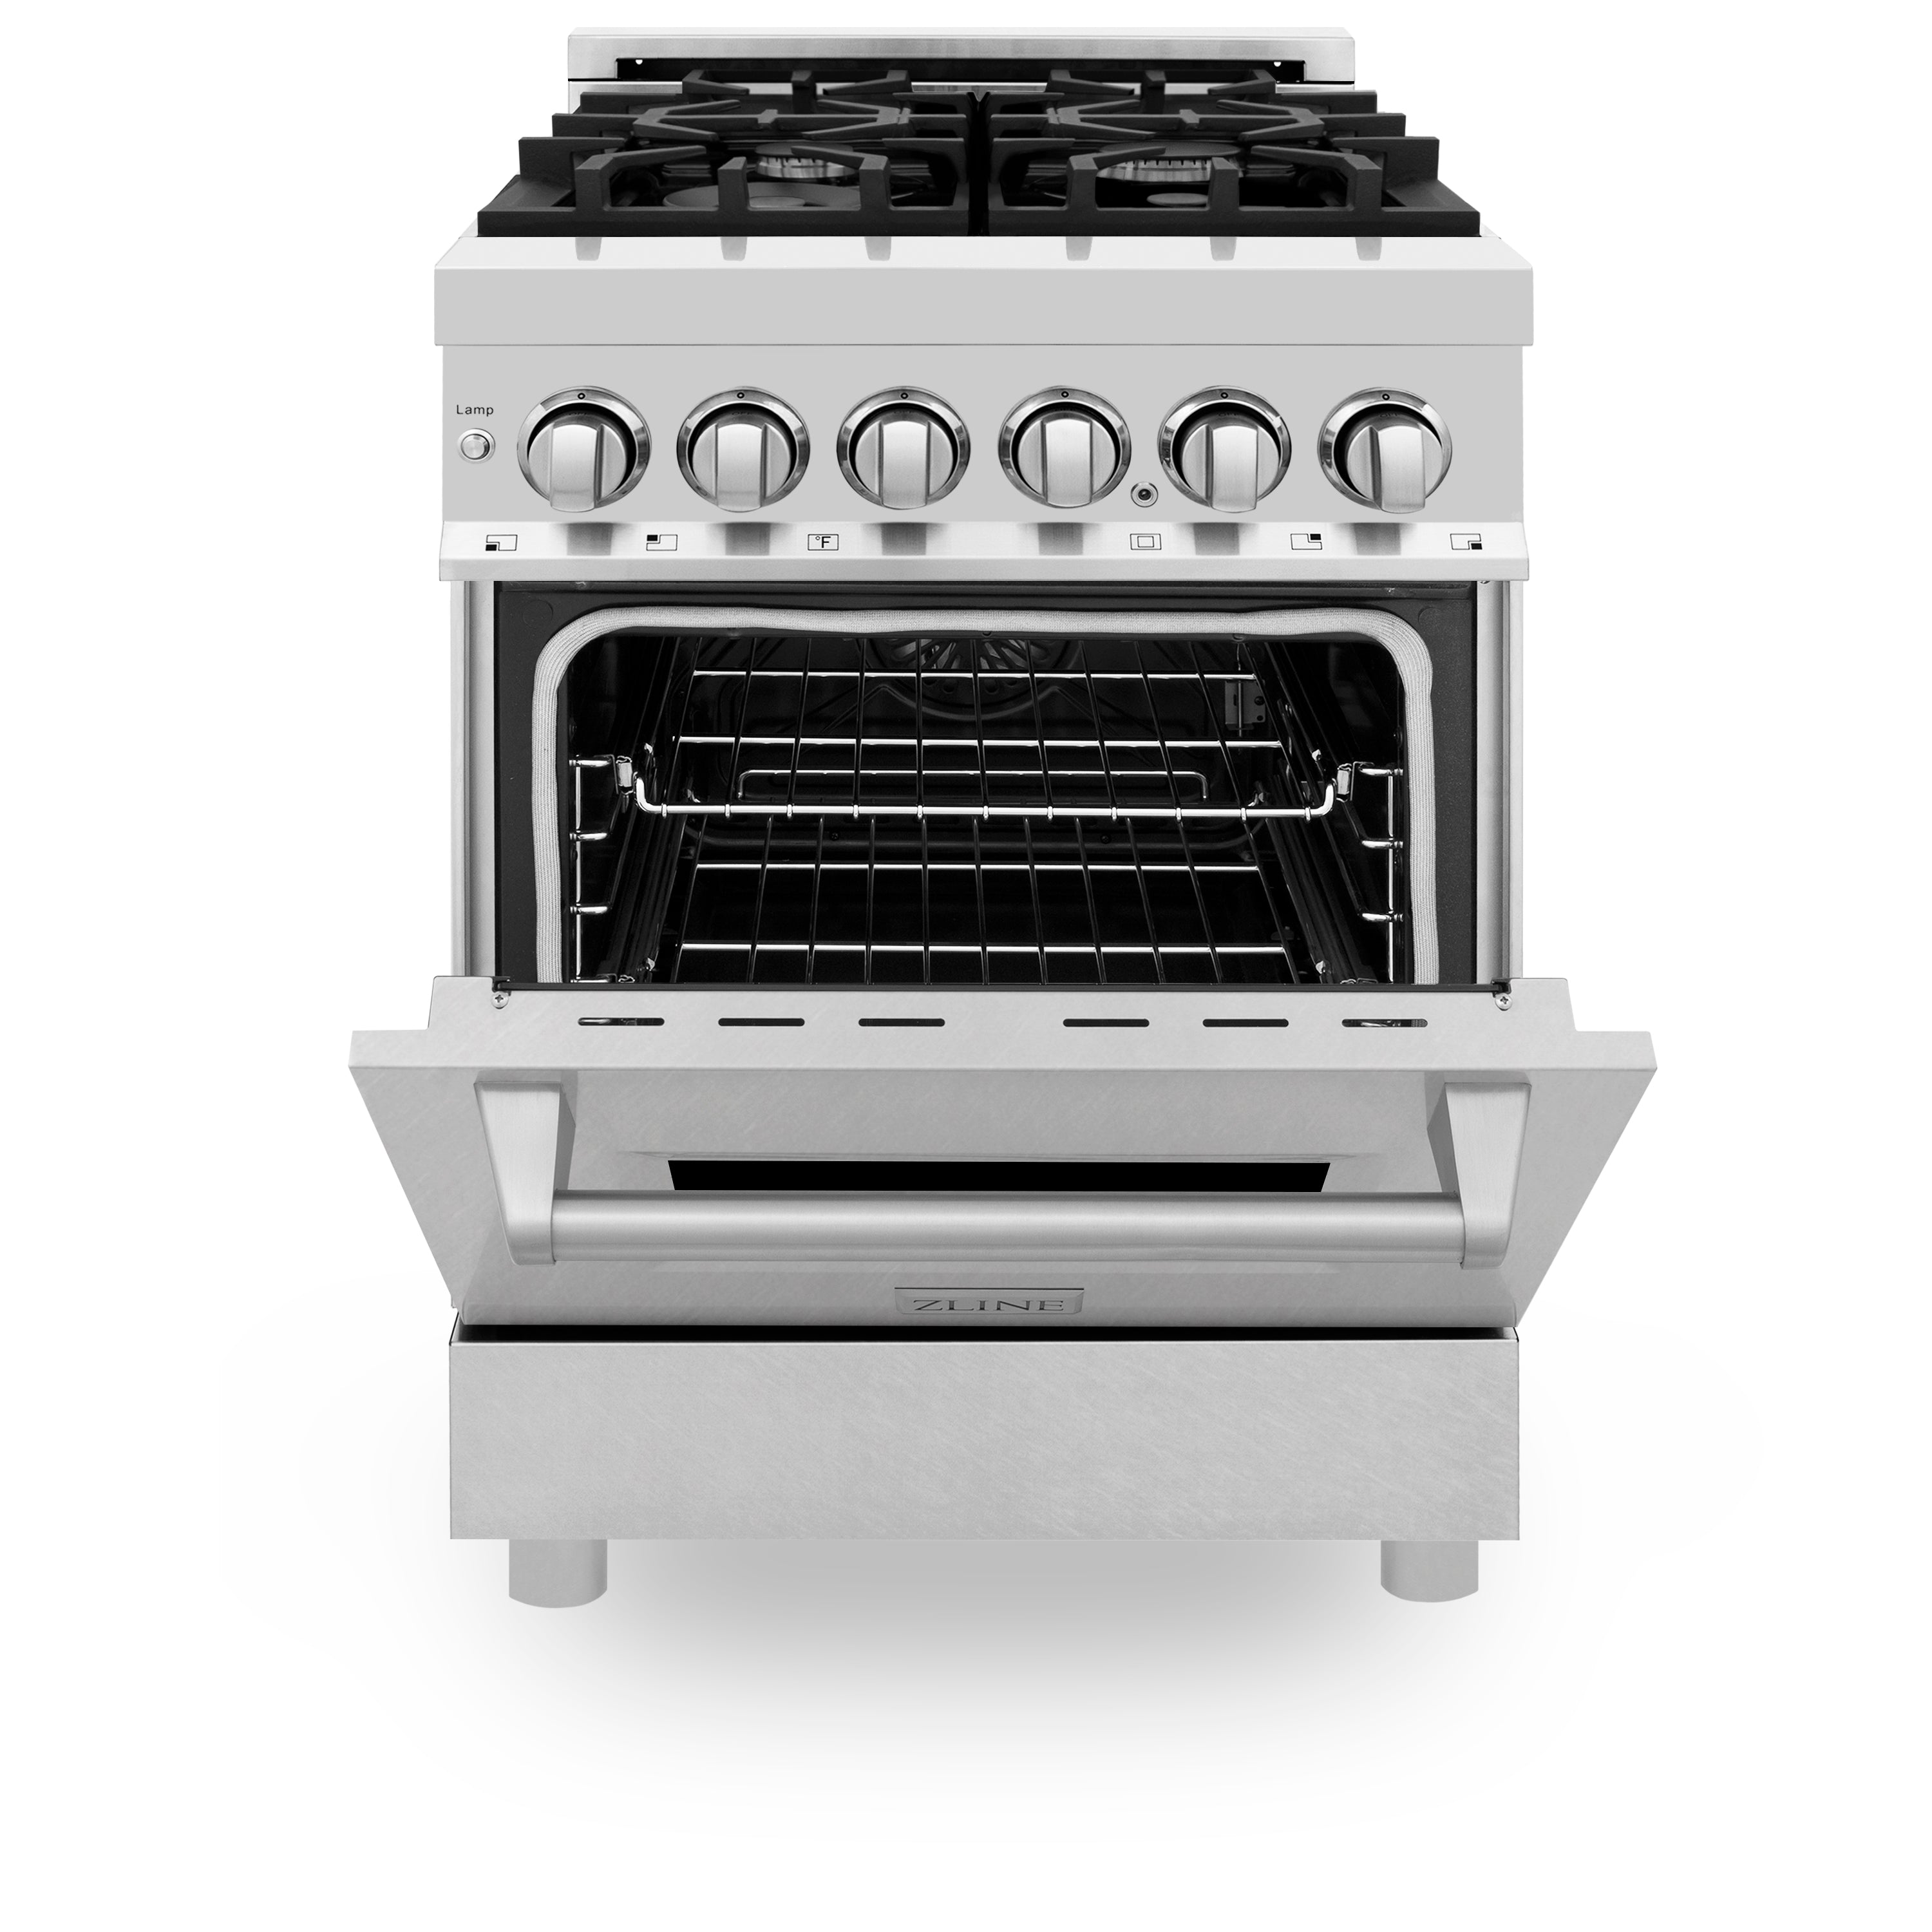 ZLINE 24" 2.8 cu. ft. Dual Fuel Range with Gas Stove and Electric Oven in Fingerprint Resistant Stainless Steel (RA-SN-24)